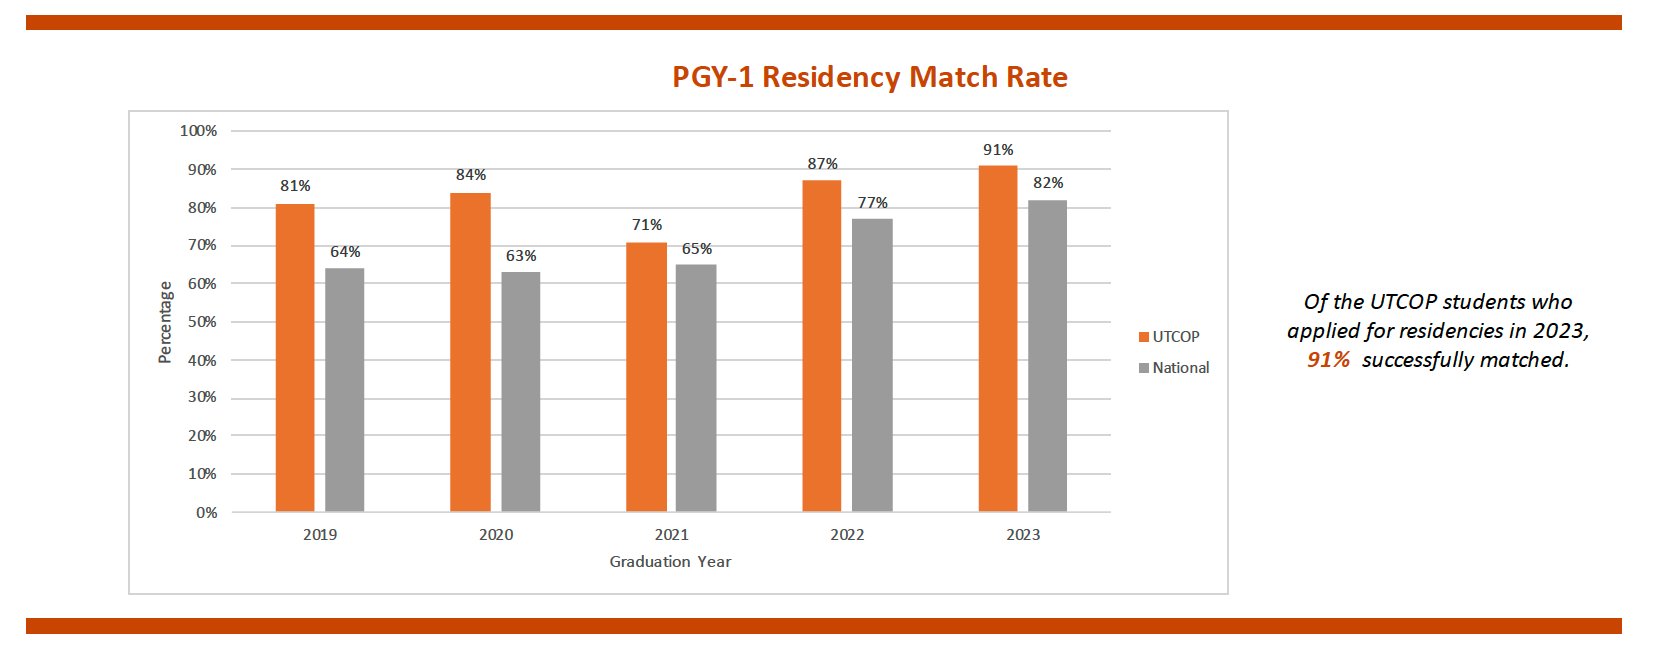 PGY-1 Residency match rate for Pharm.D. students graduating in 2019 through 2023